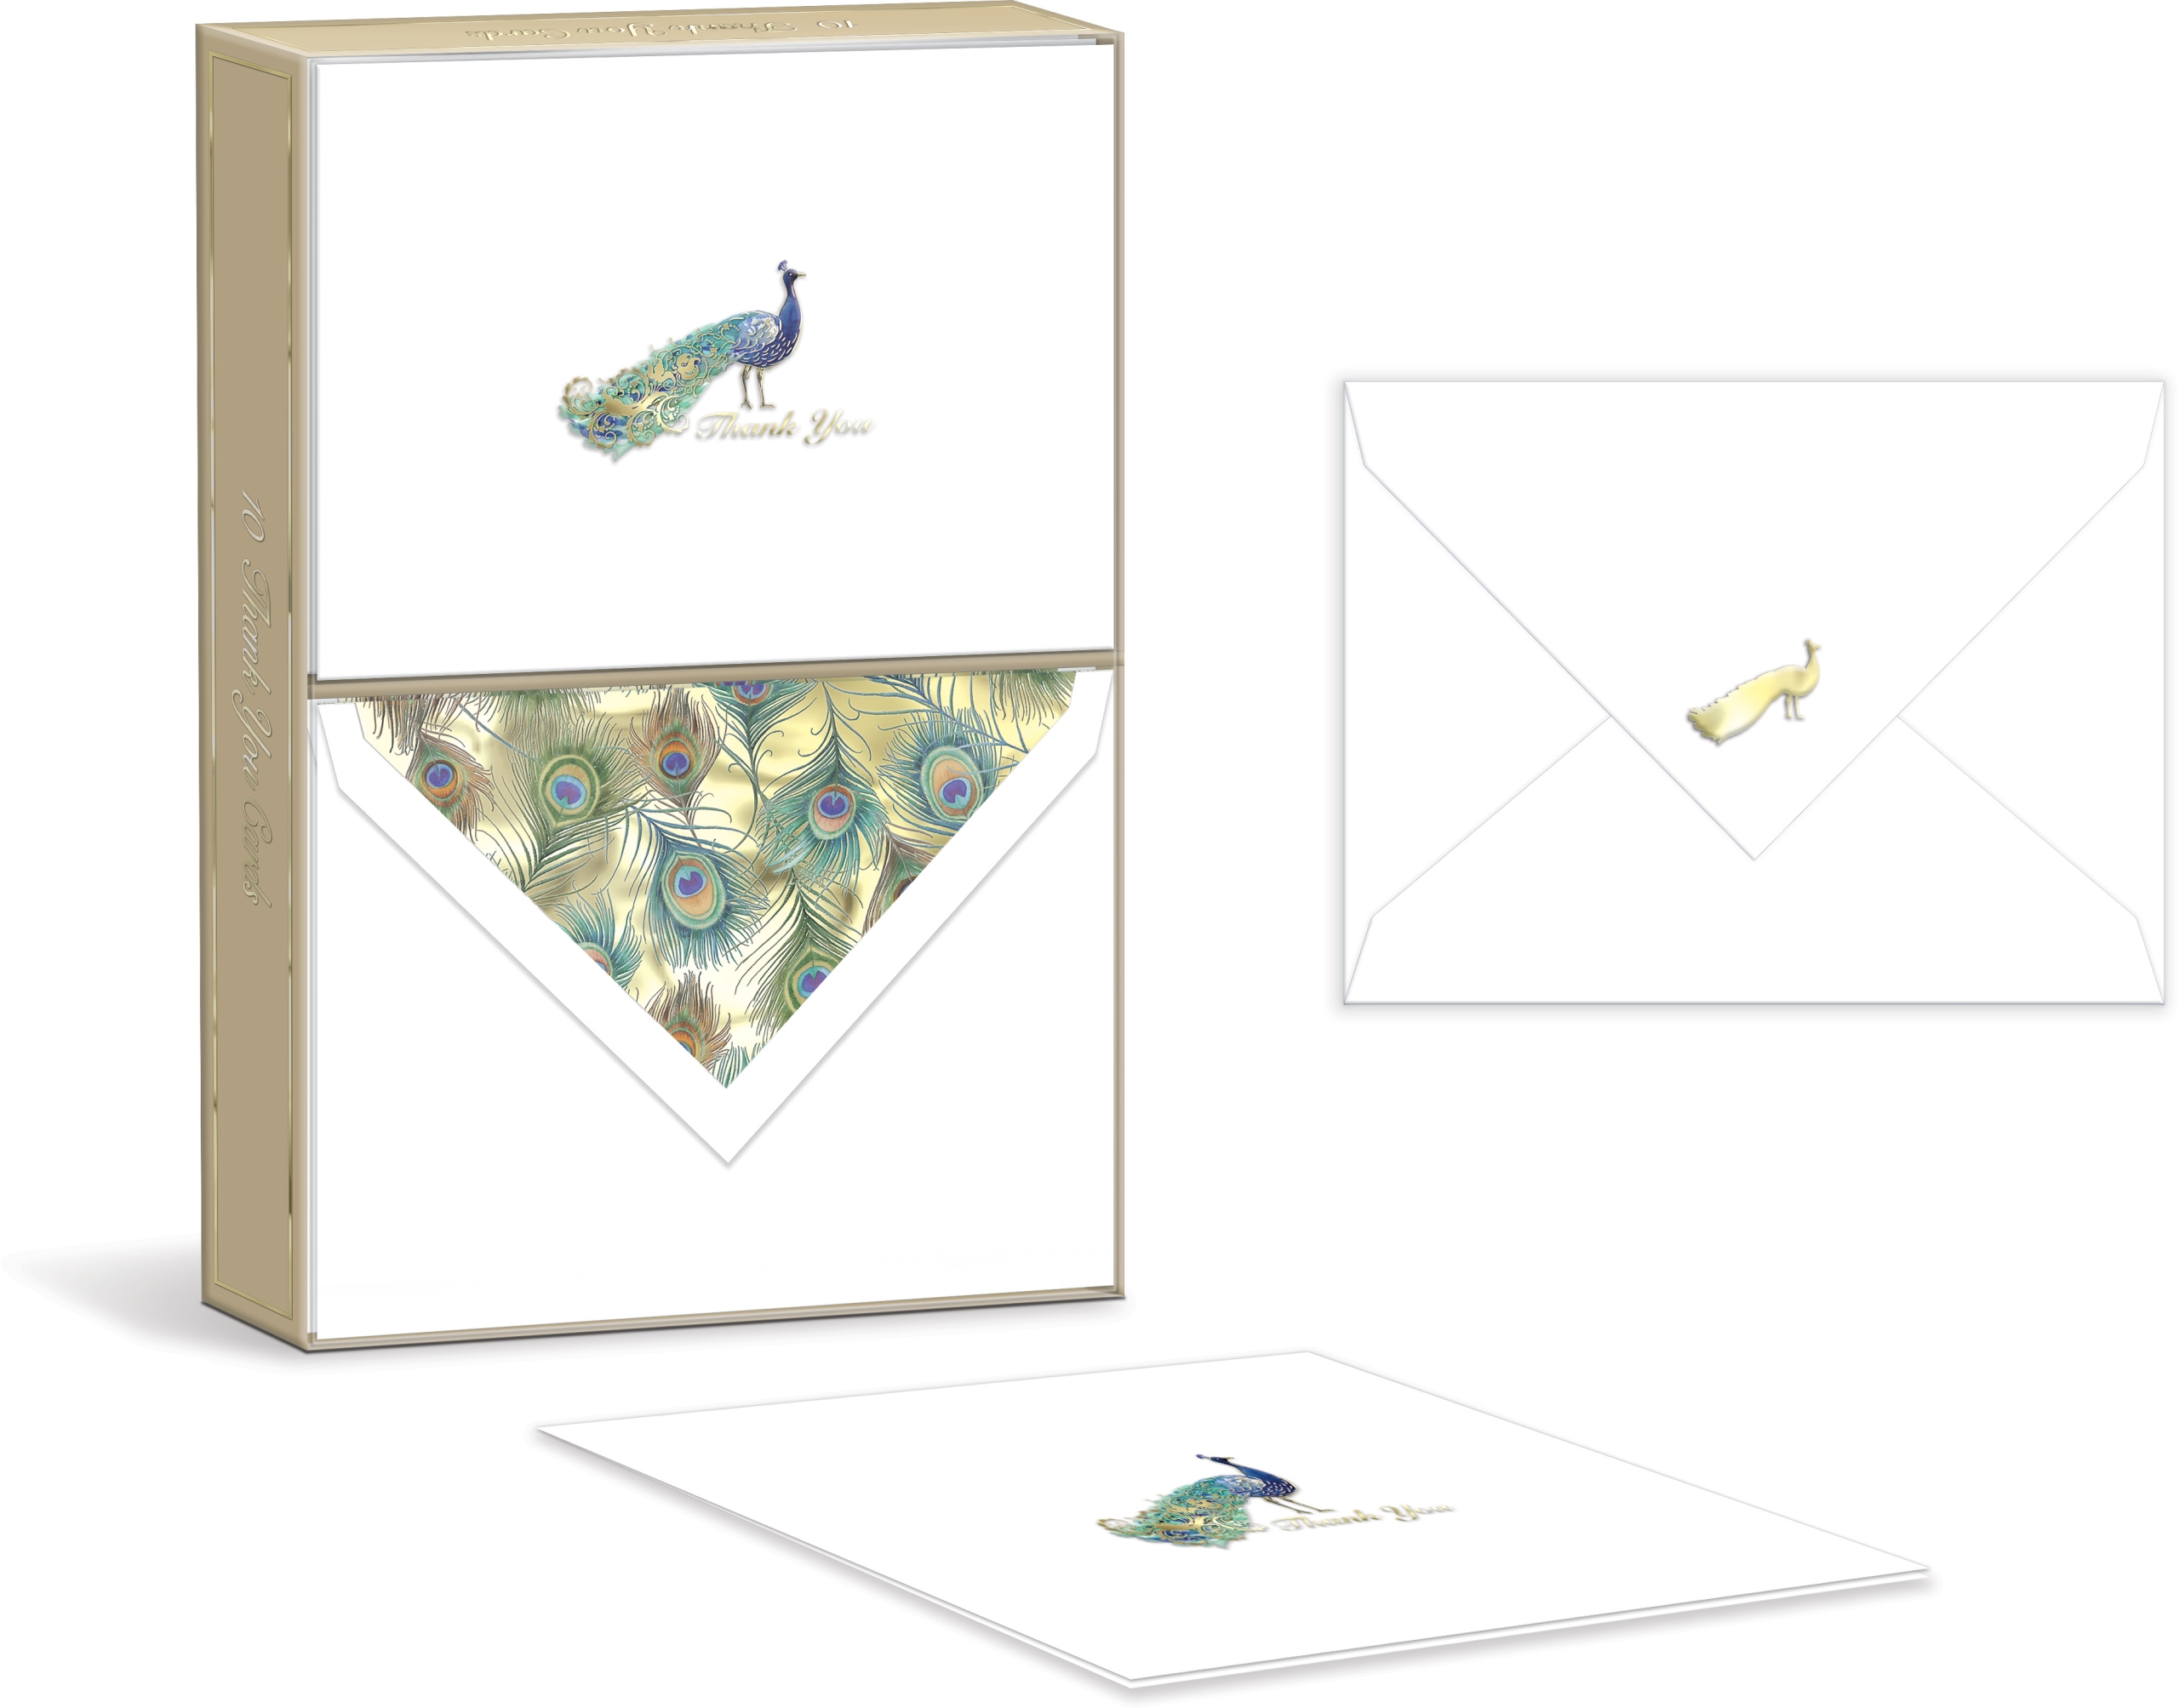 12 Notes Cards 56974 Punch Studio Greeting Cards in Keepsake Box Peacock 